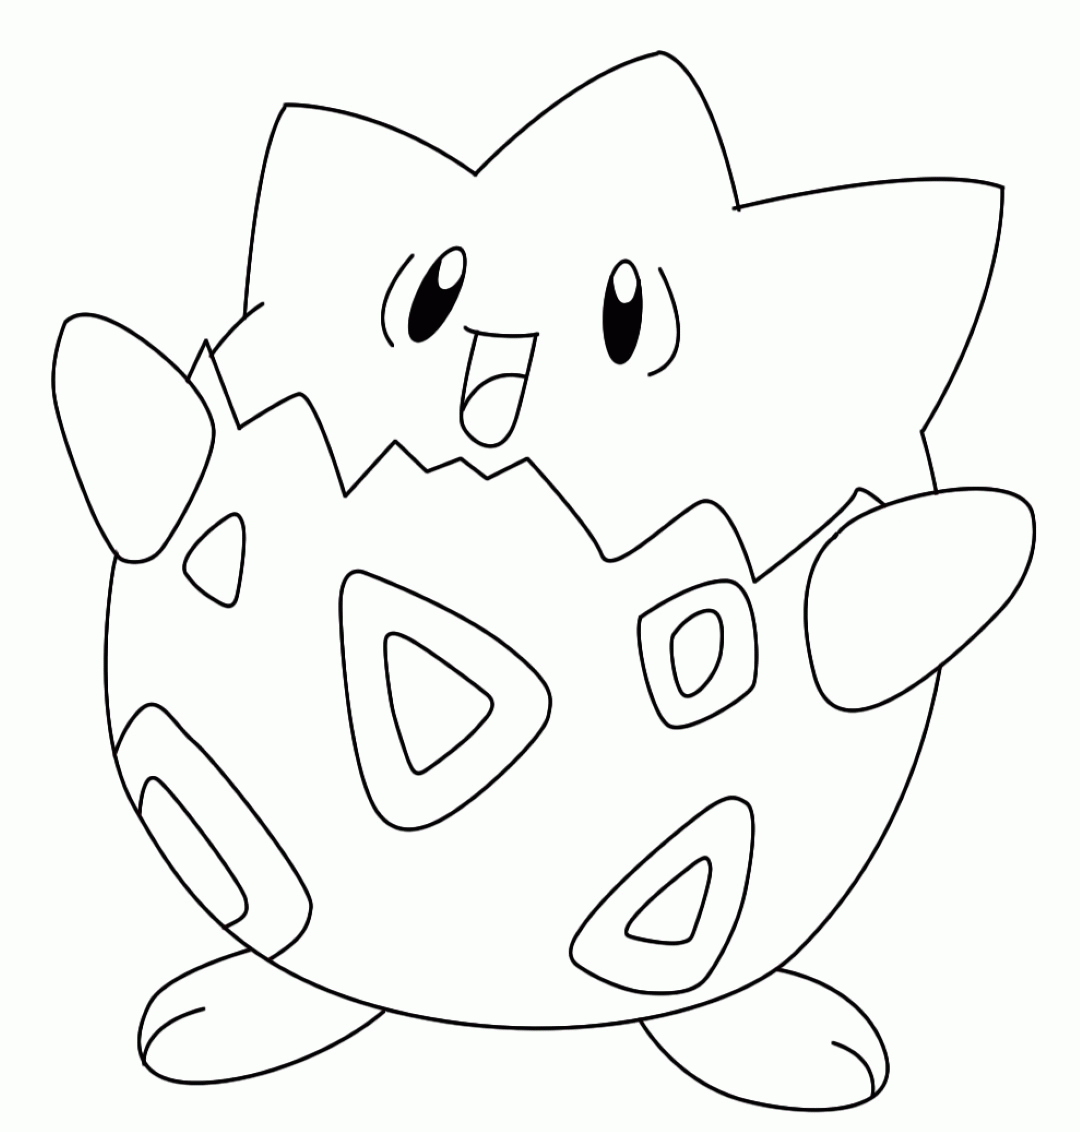 Togekiss Pokemon Coloring Pages Coloring Pages